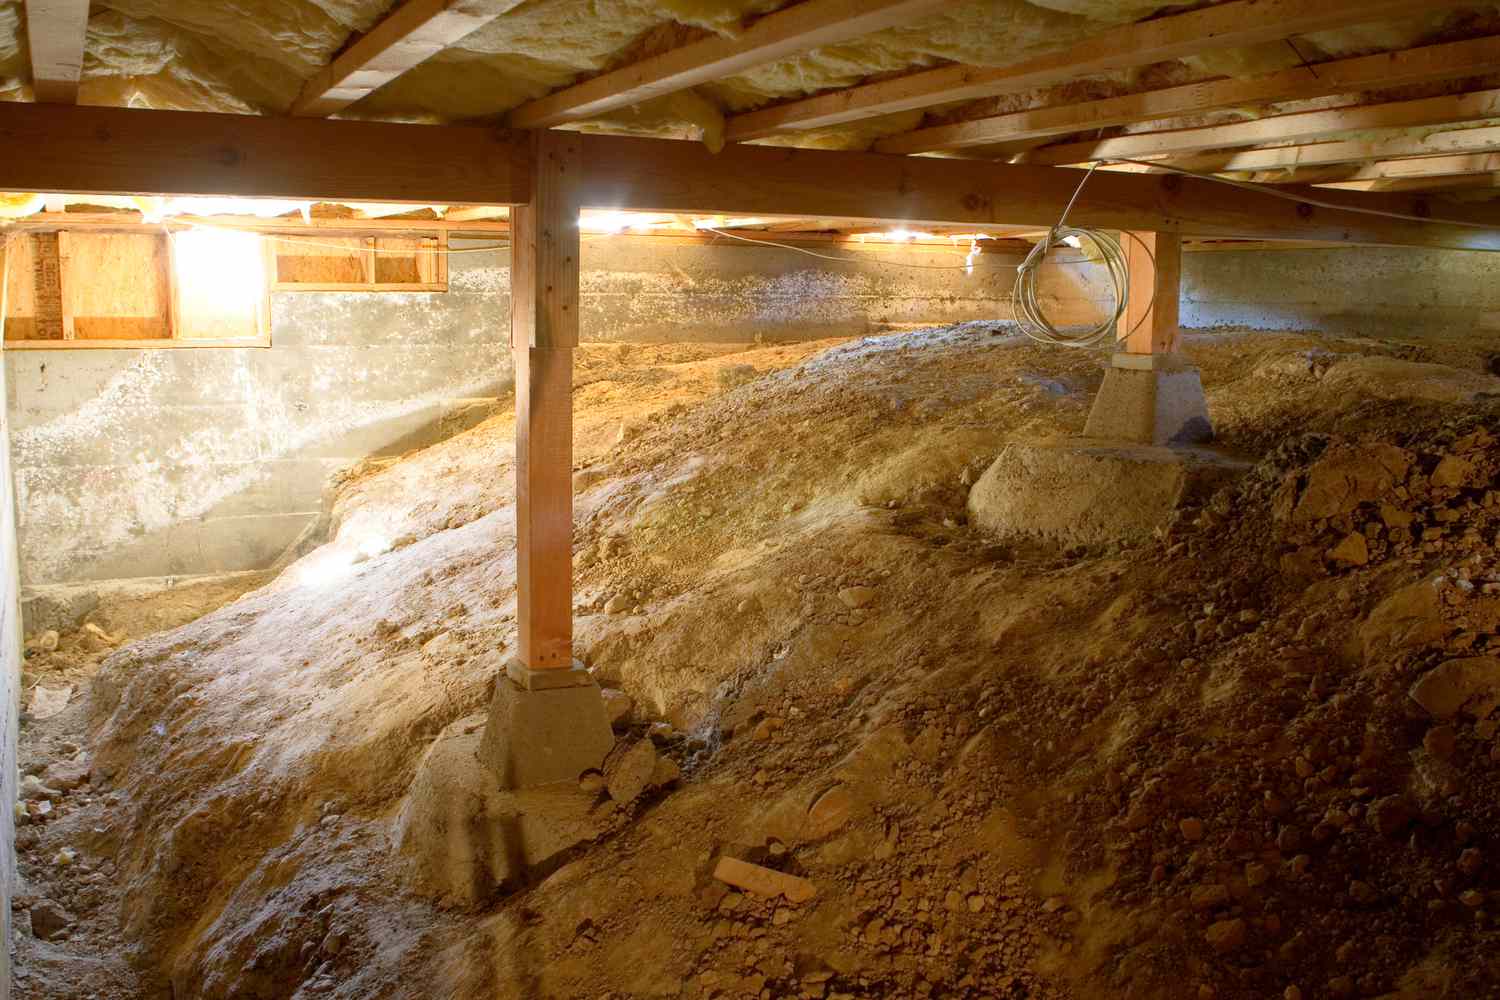 Fix water problems in the crawl space